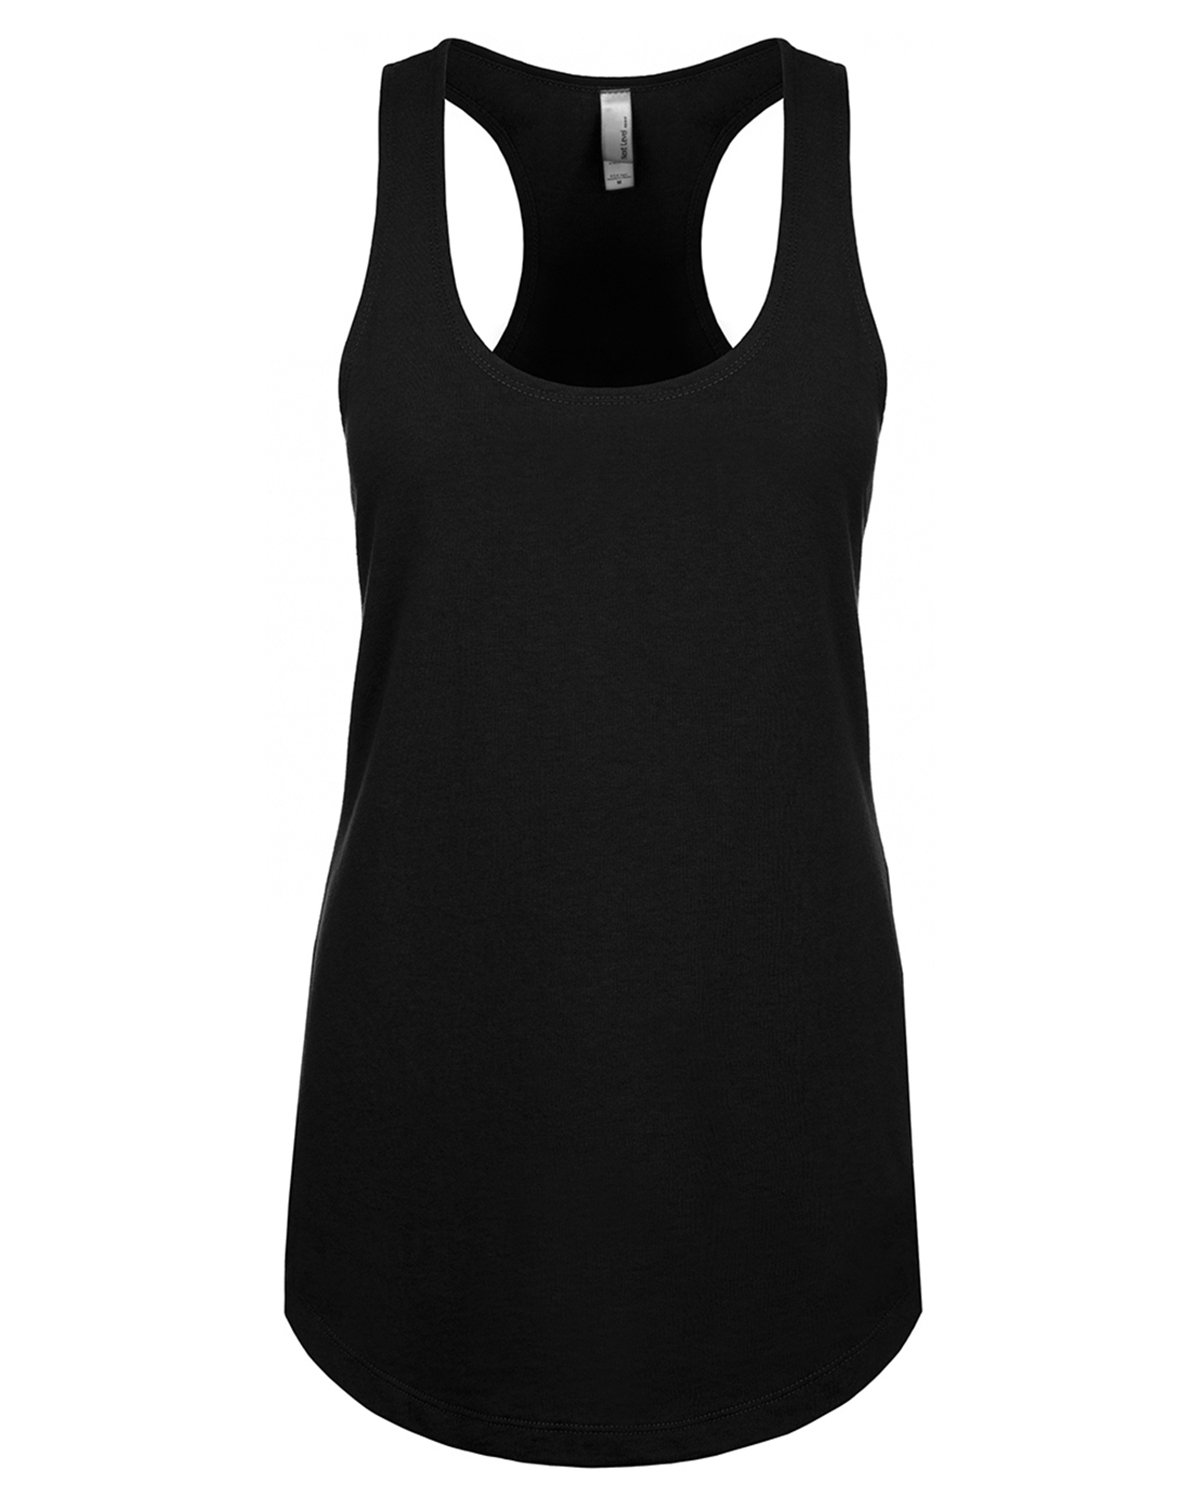 Next Level Apparel Ladies' French Terry Racerback Tank | alphabroder